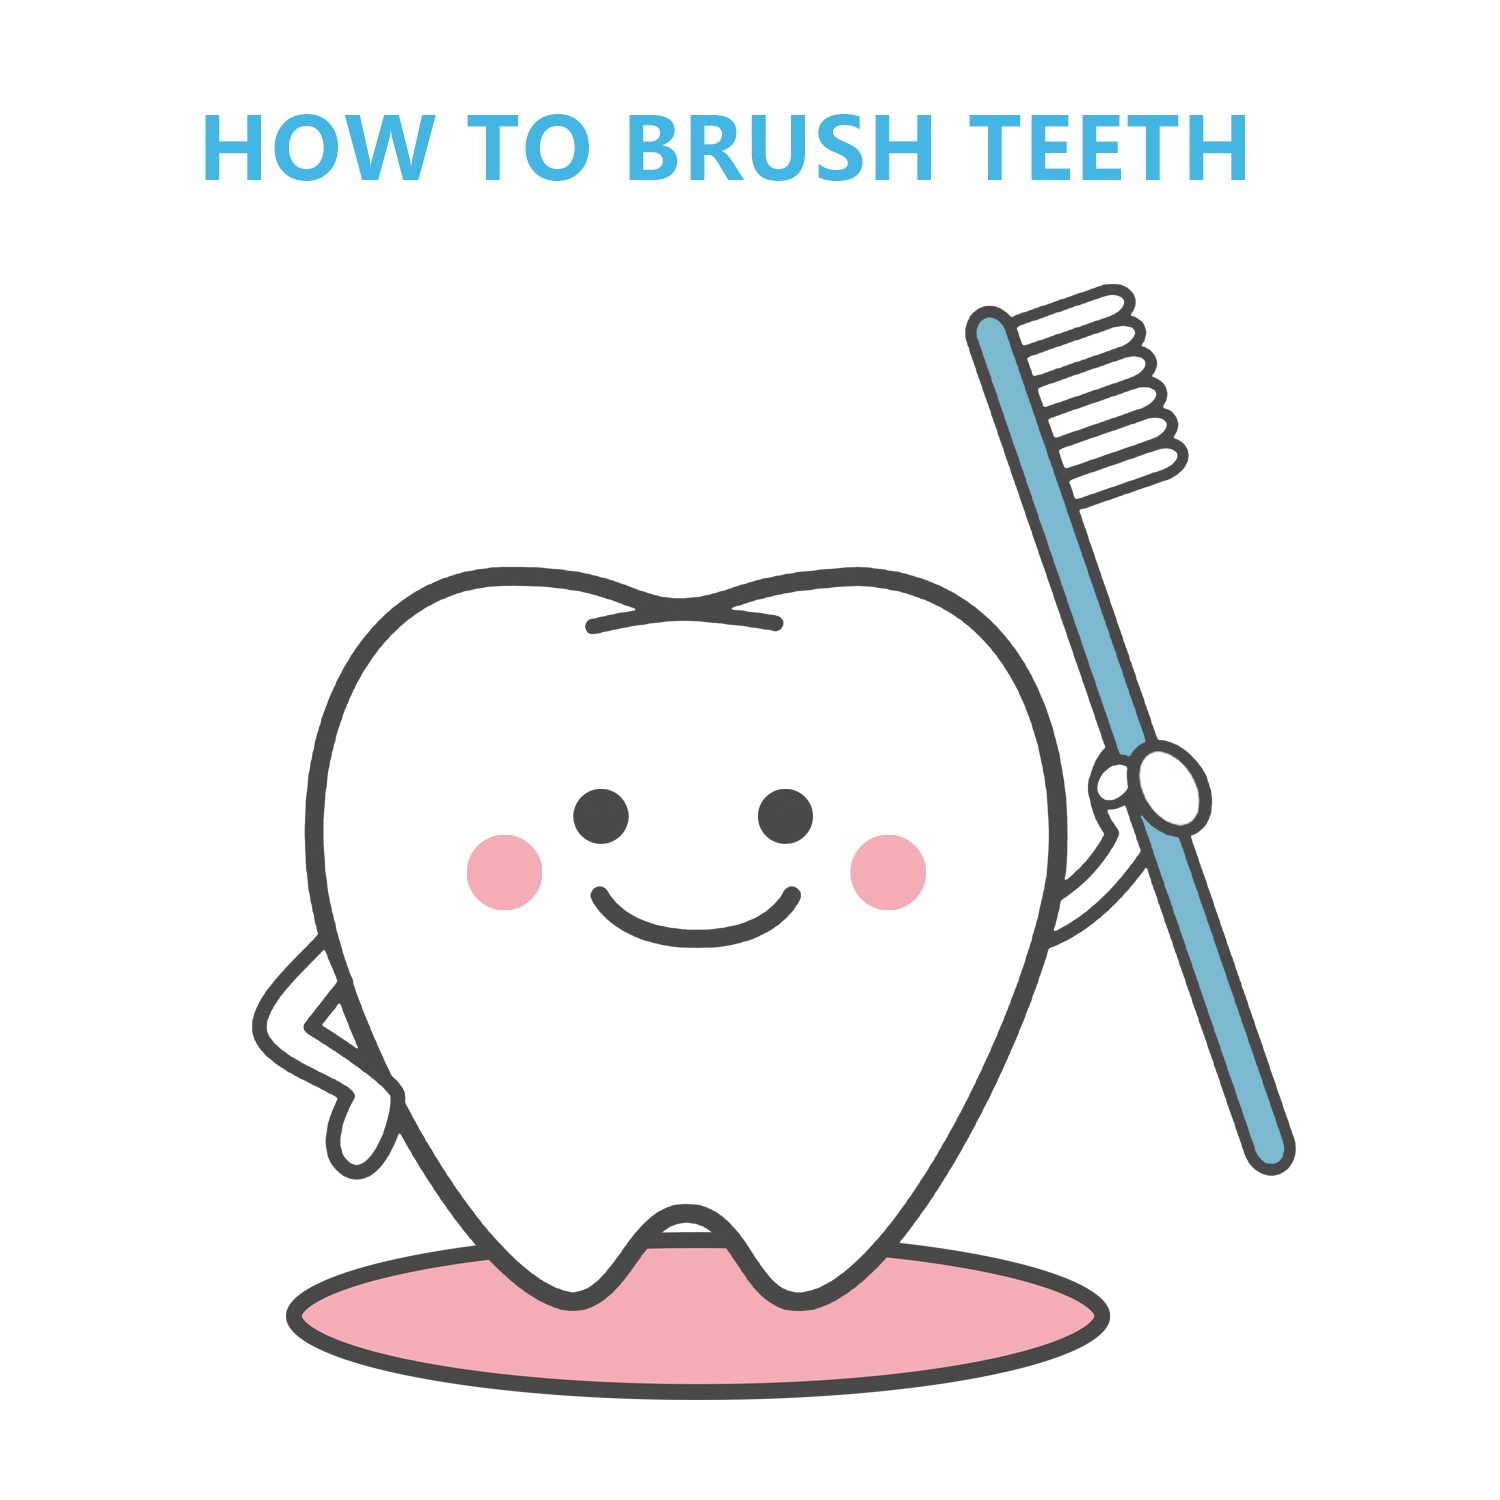 How to Brush Your Teeth Properly